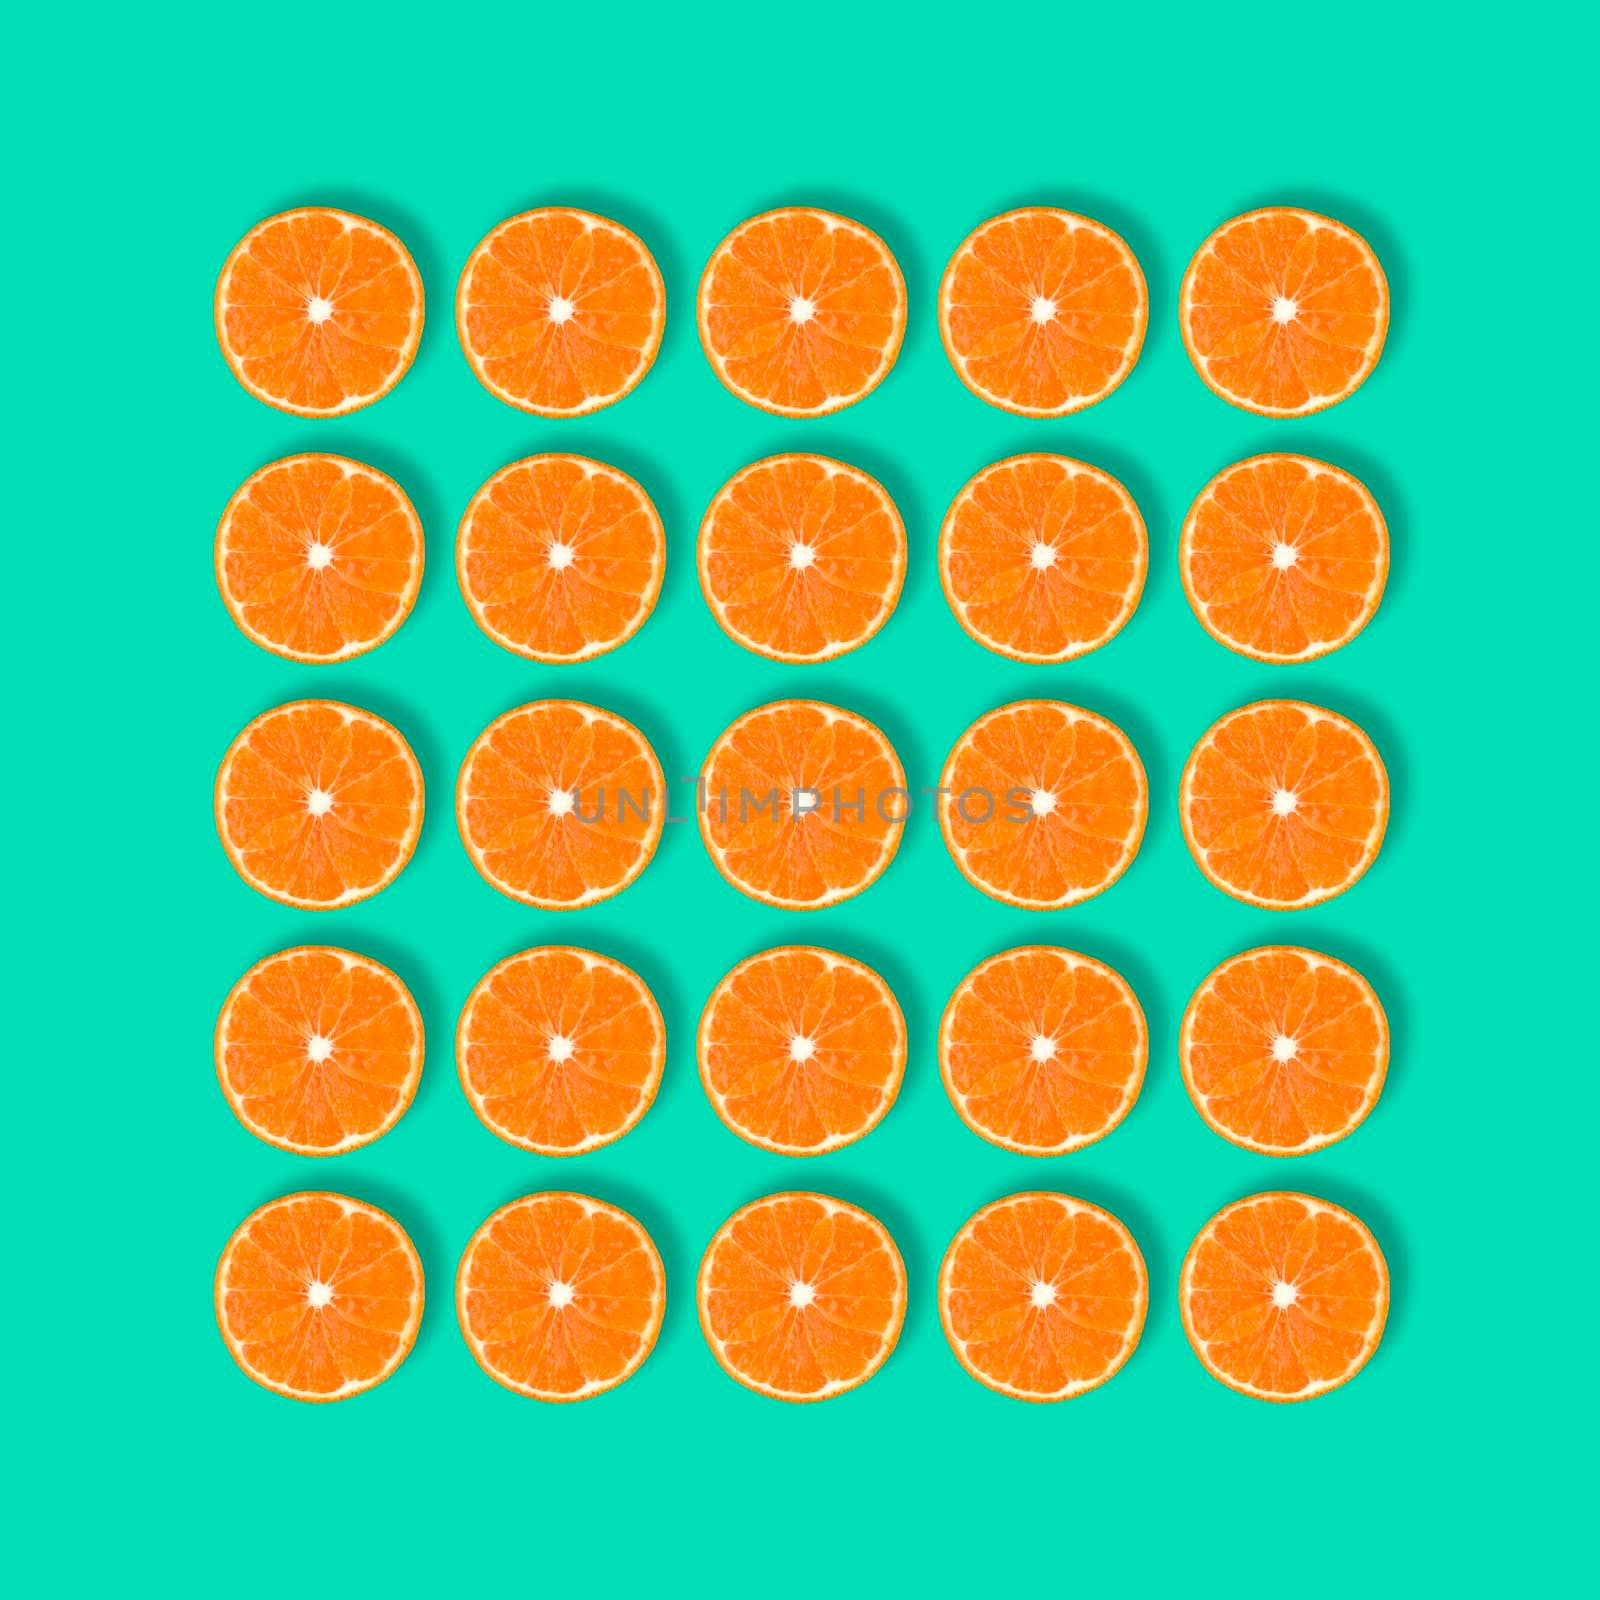 Fruit pattern of fresh mandarin slices isolated on blue or mint background. Flat lay, top view. Pop art design, creative summer concept. Half of tangerine citrus in minimal style.